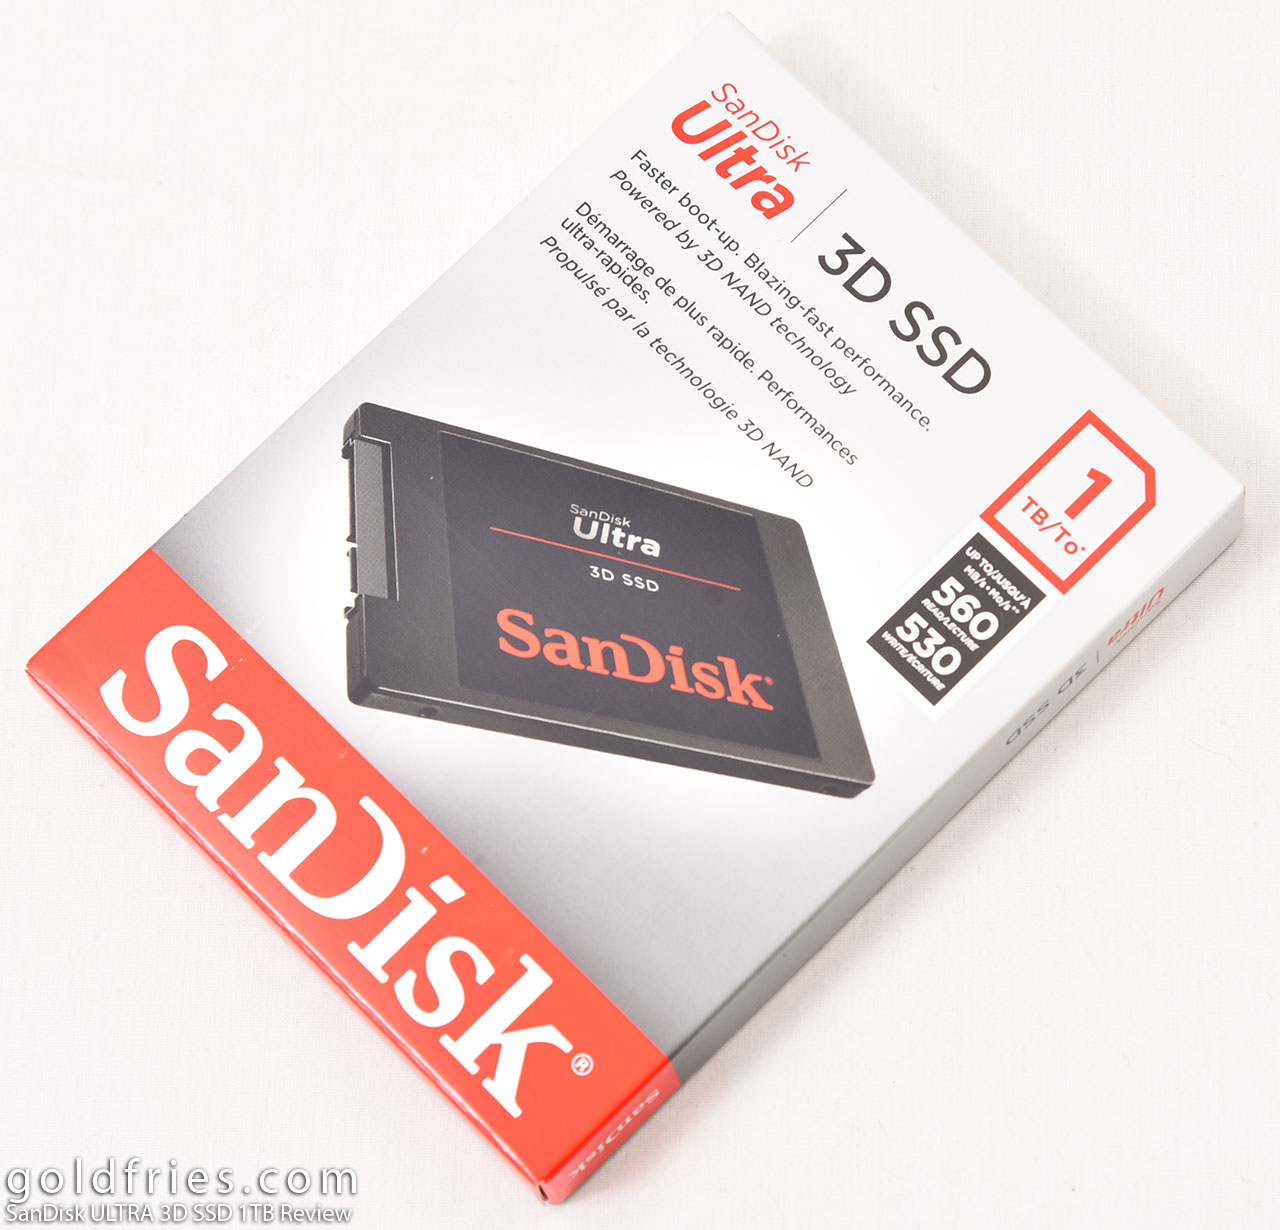 SanDisk ULTRA 3D SSD 1TB Review